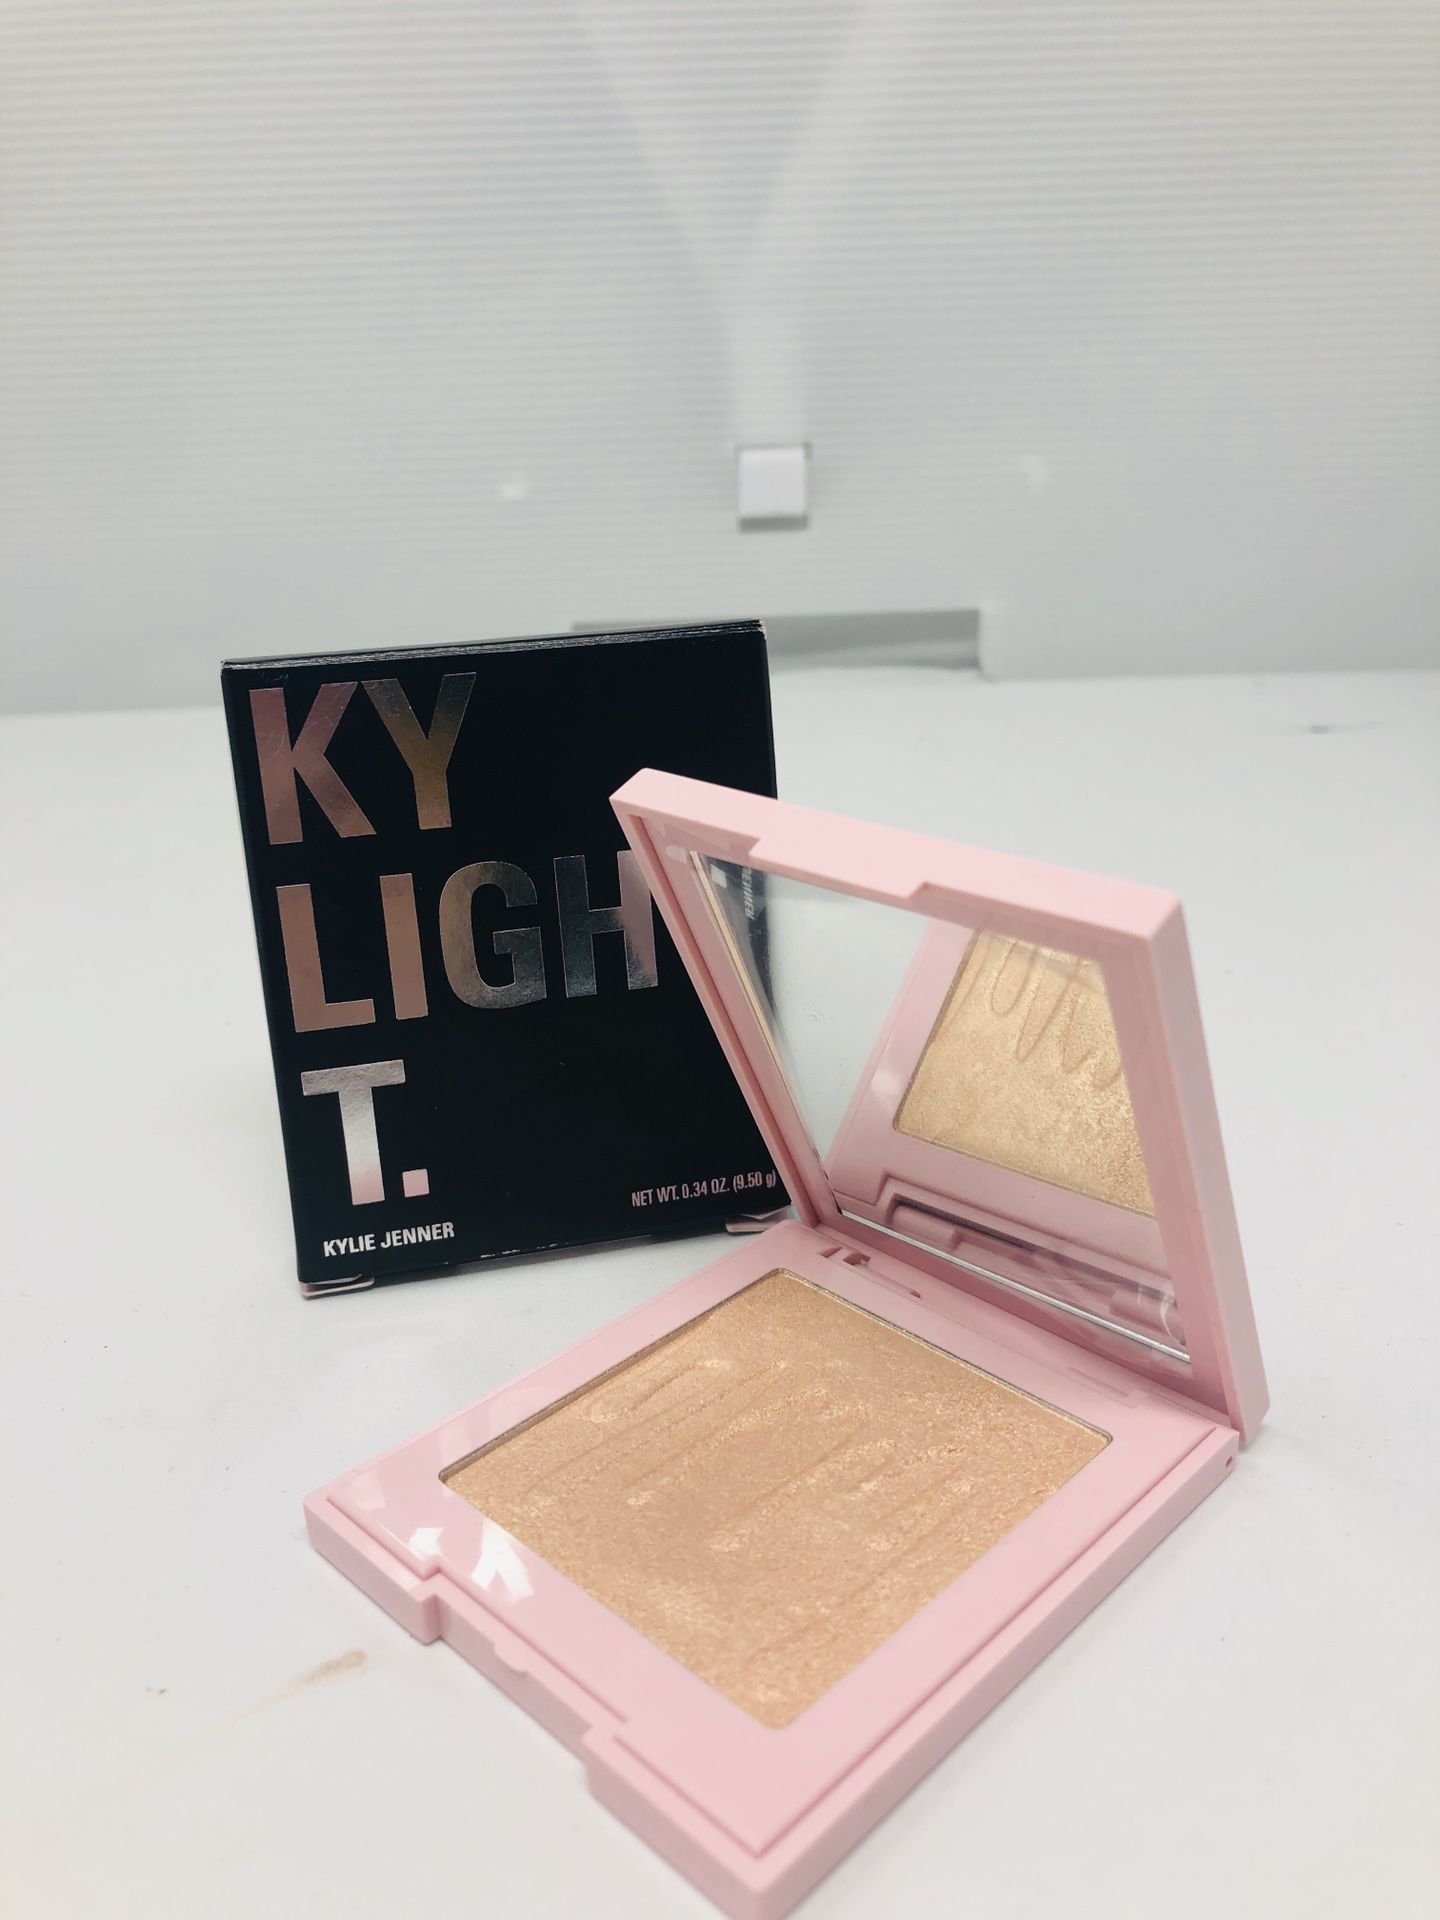 Kylie Jenner Kylight “Cheers Darling” 0.34 Oz. (9.50 g)